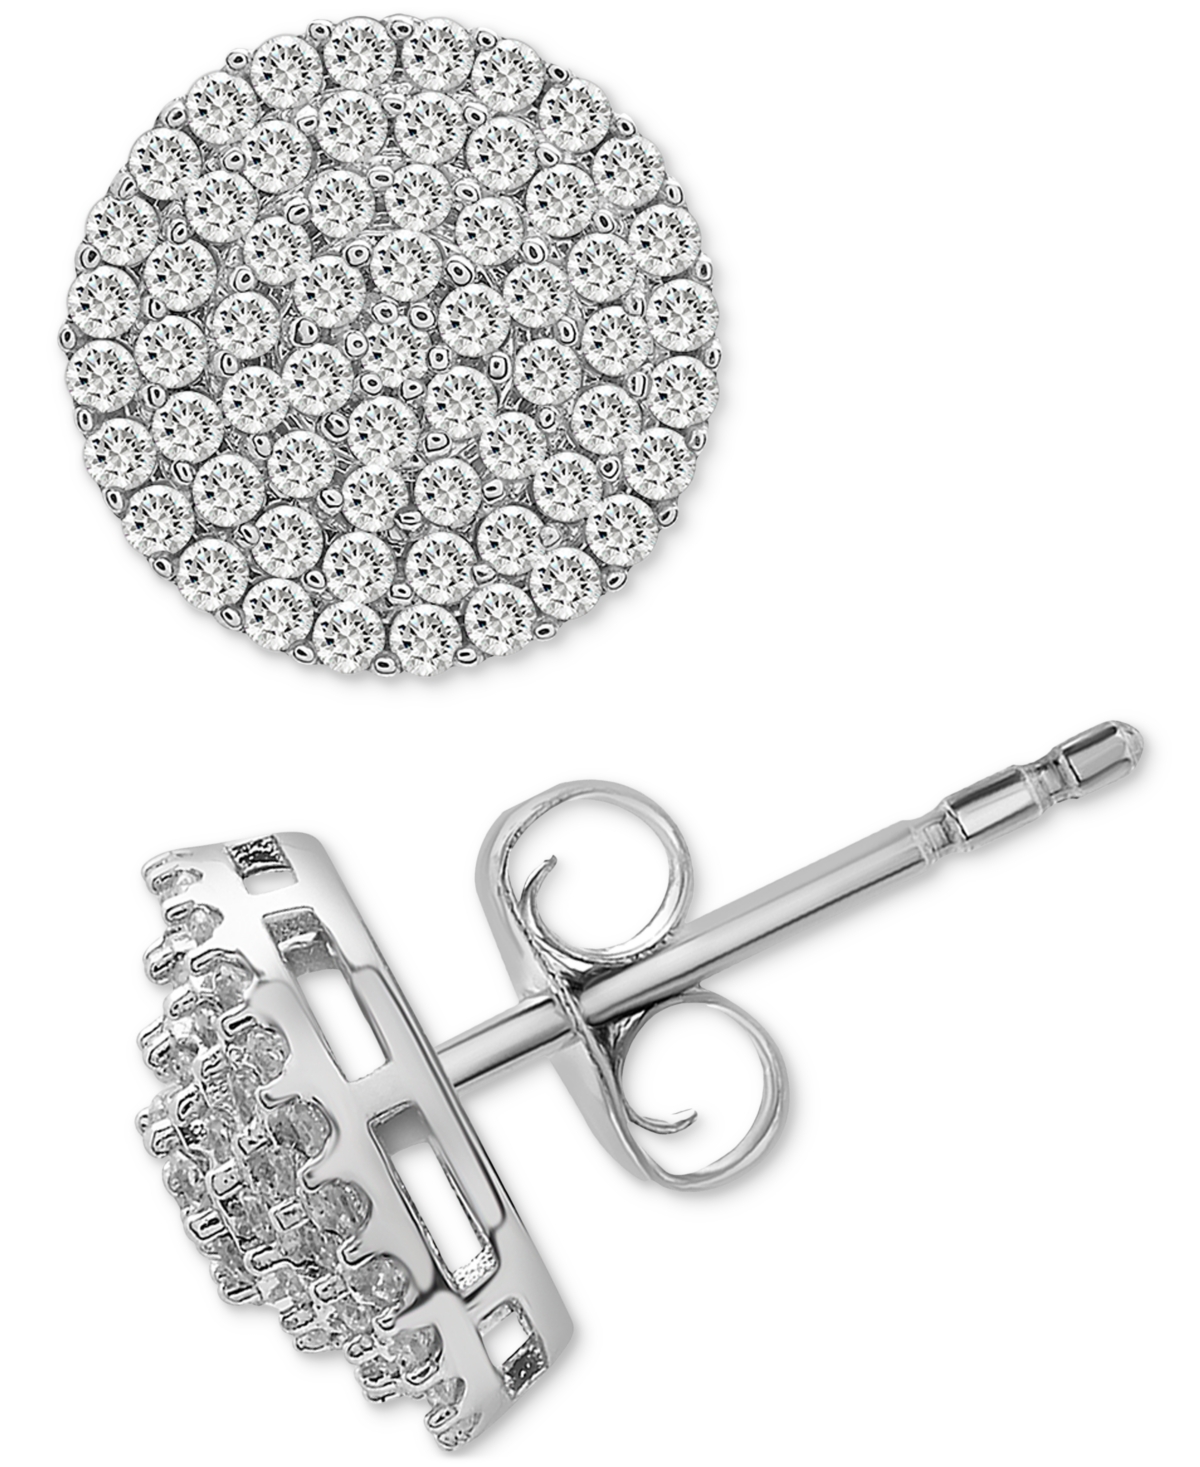 Diamond Circle Stud Earrings (1 ct. t.w.) in 14k White Gold, Created for Macy's - White Gold